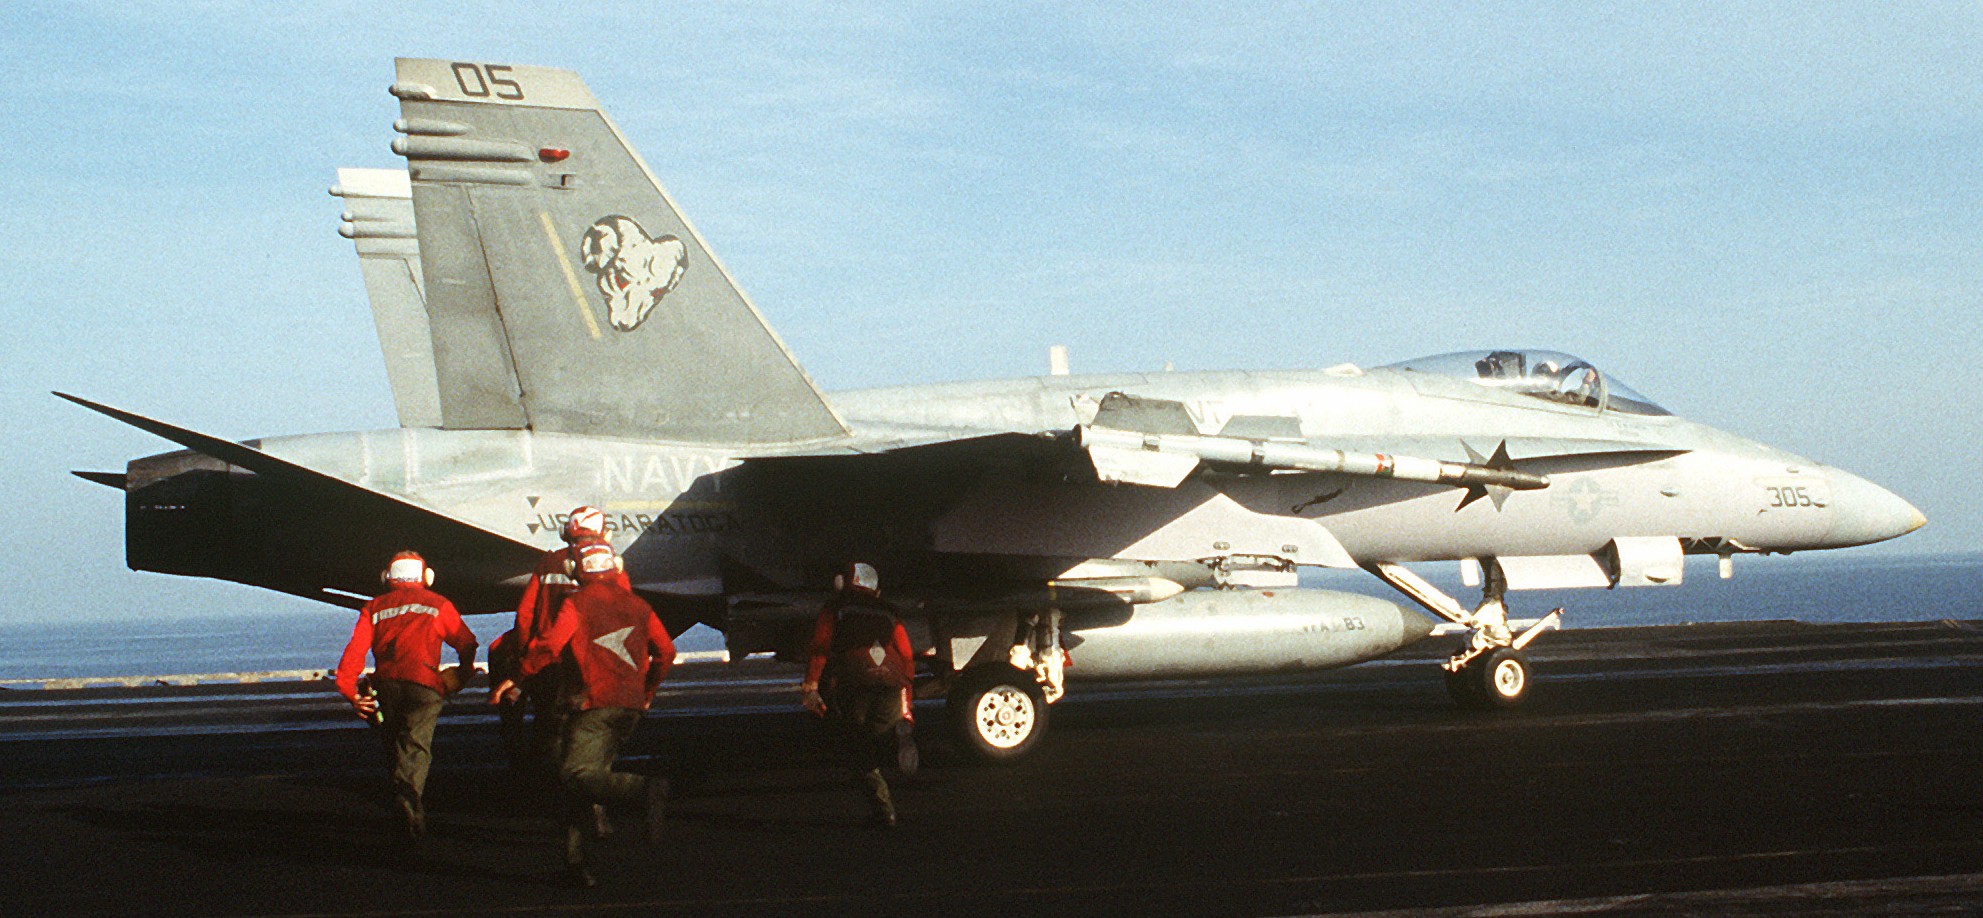 vfa-83 rampagers strike fighter squadron f/a-18c hornet cvw-17 uss saratoga cv-60 149